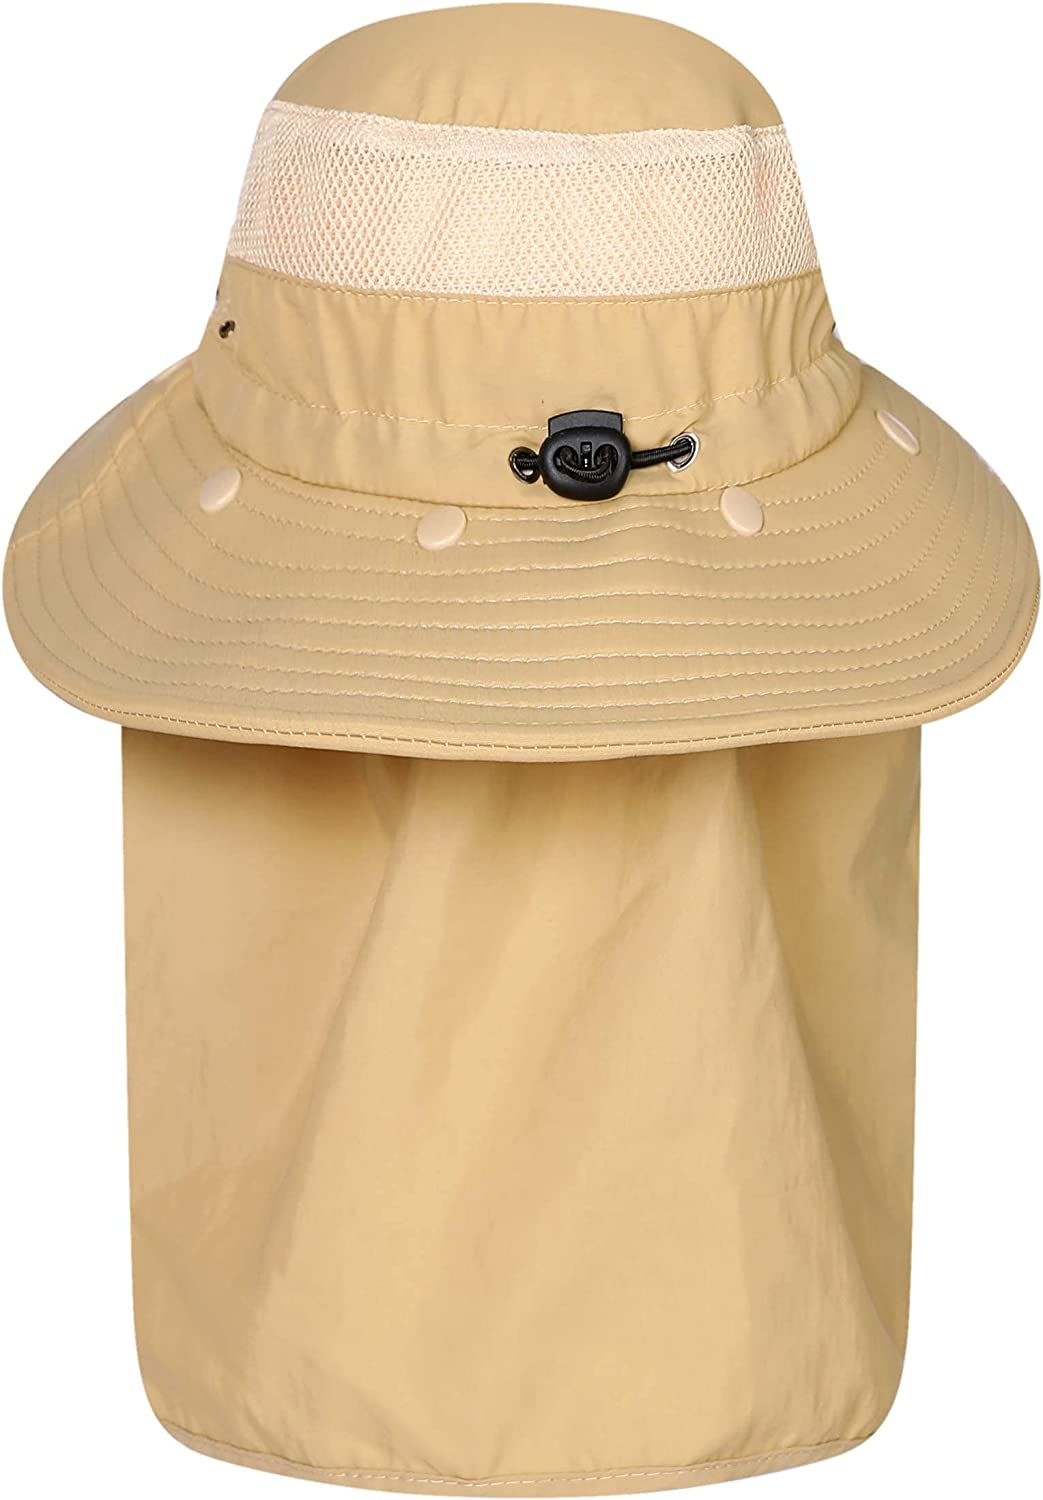 Yr.Lover Fishing Outdoor Sun Hat with Removable Neck Face Flap, UPF 50+ UV Sun Protection Bucket Cap, Mesh Boonie Hat